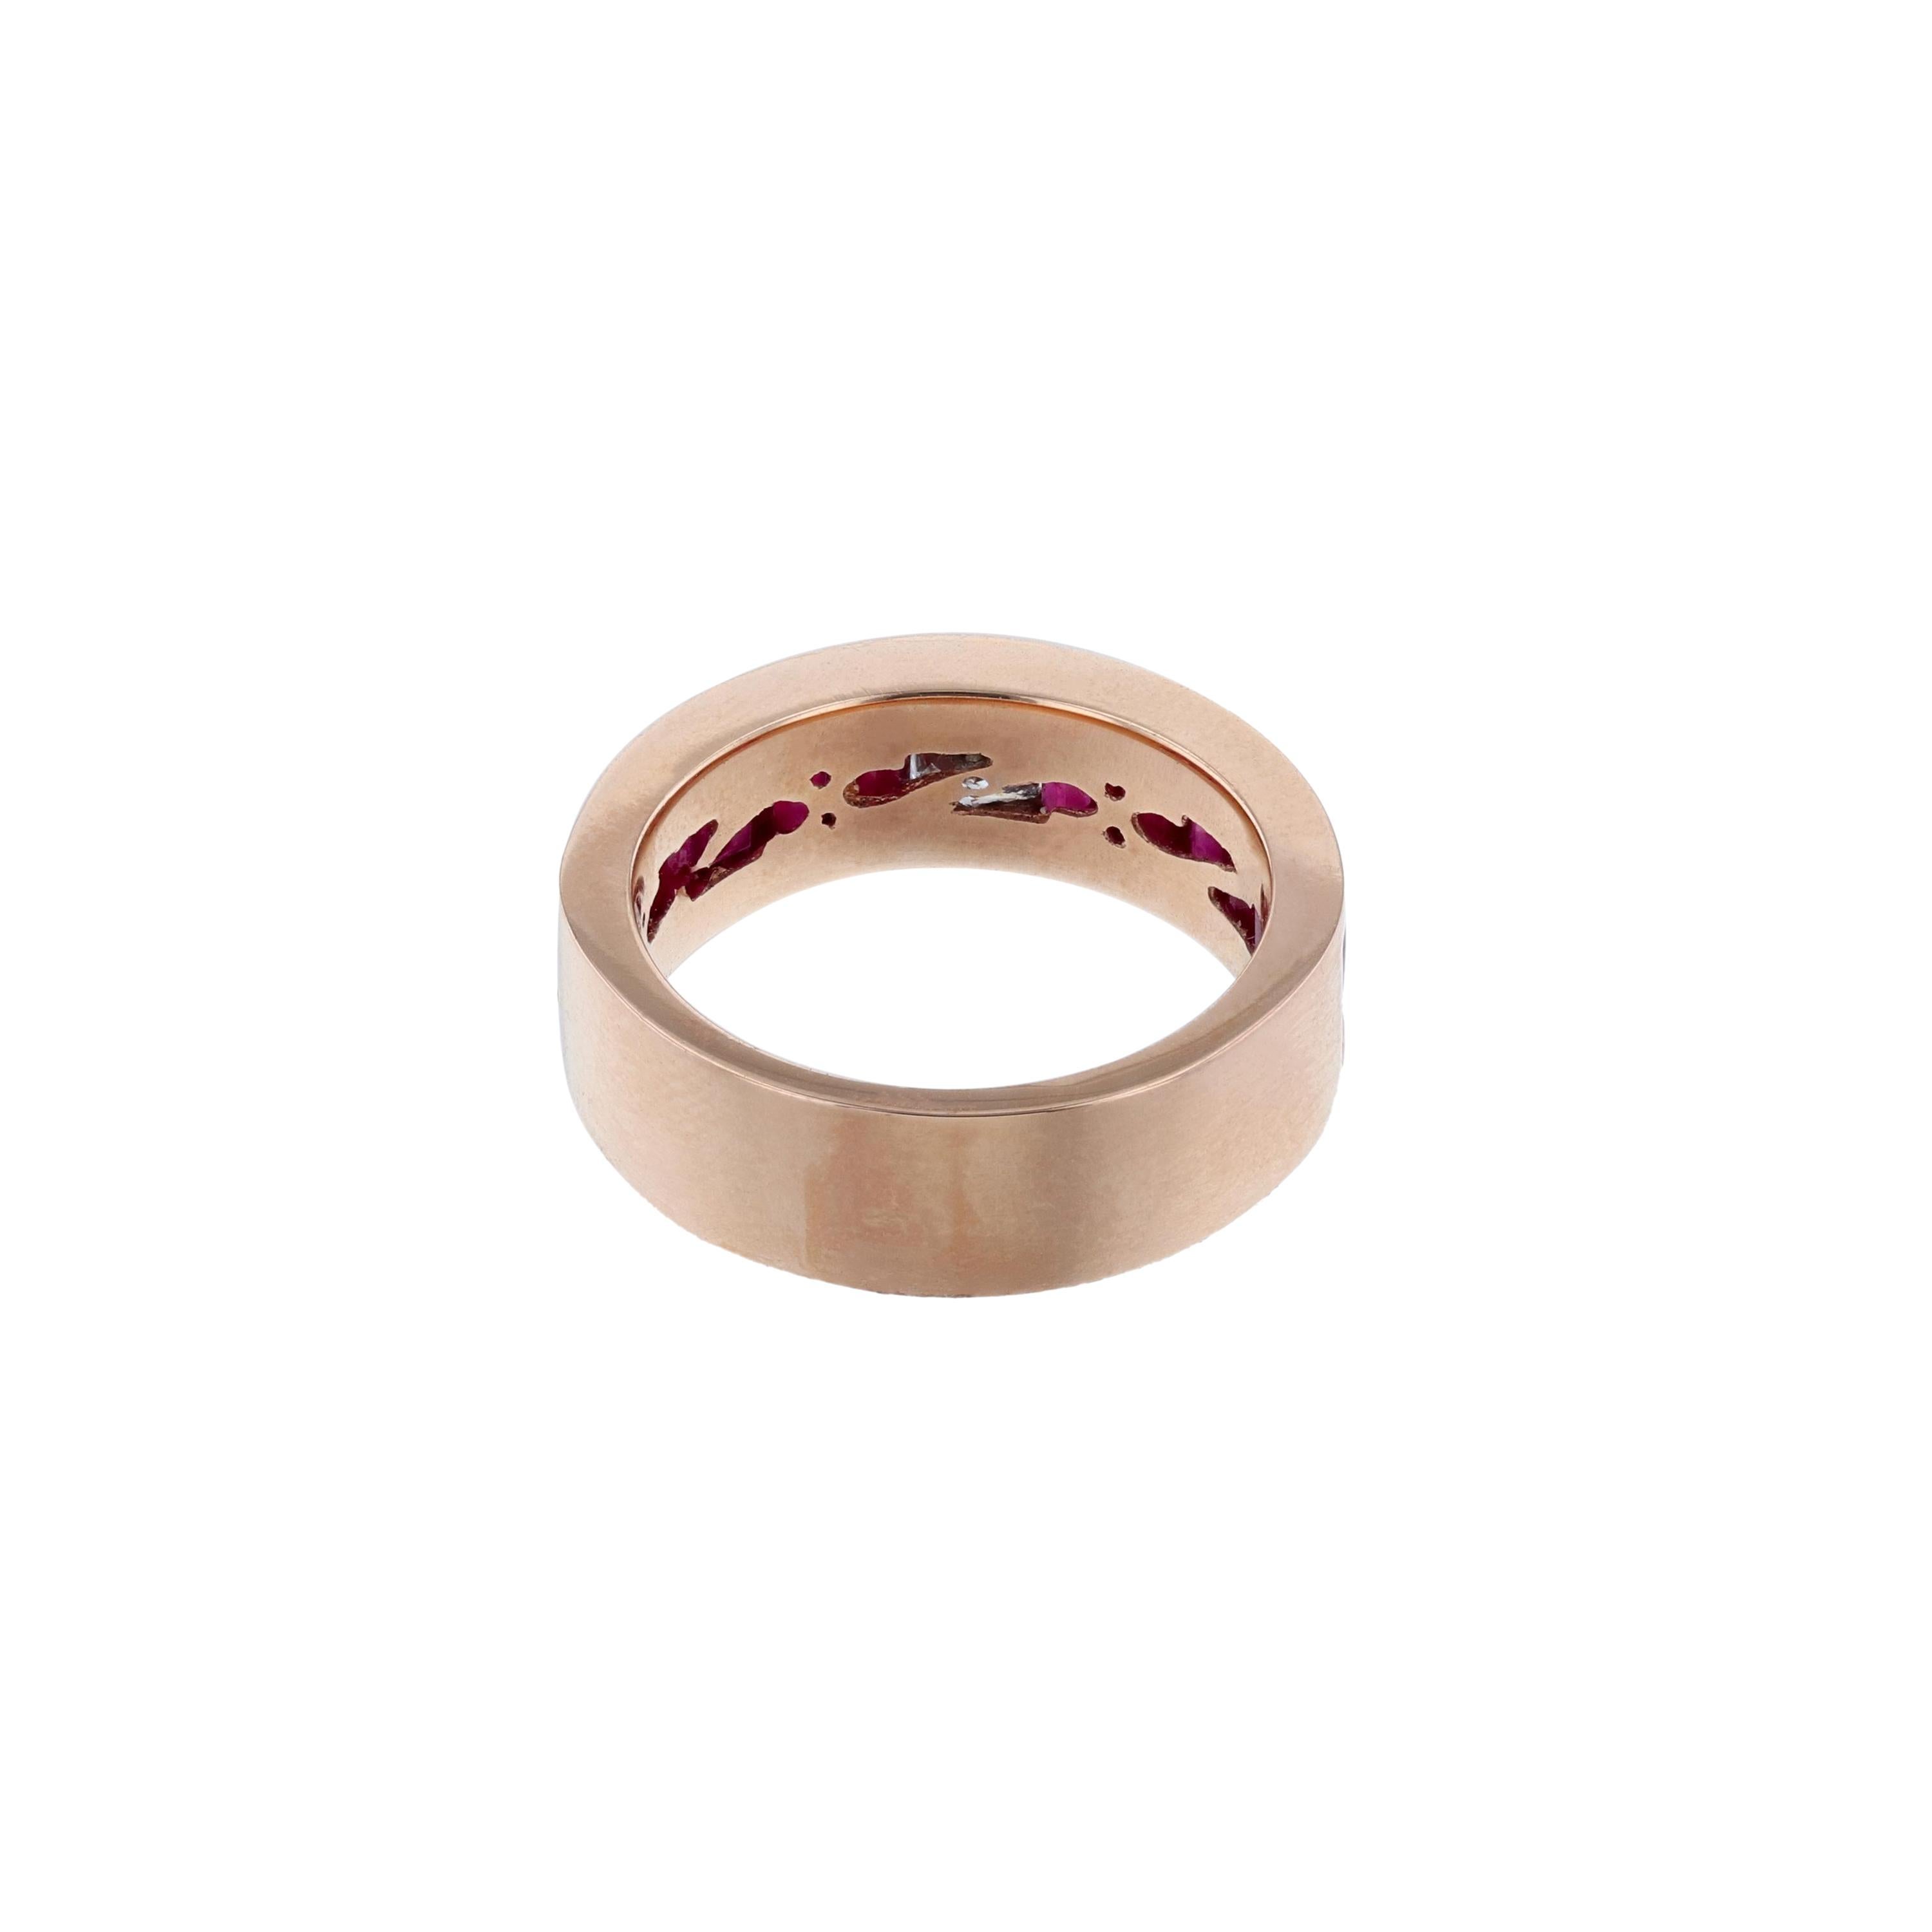 This ring is made in 14K rose gold and features 1 princess cut diamond weighing 0.30 carat. It also features 12 baguette cut rubies weighing 3.30. All stones are channel set and weigh 3.60 carats combined with a  color grade (H) clarity grade (SI2). 